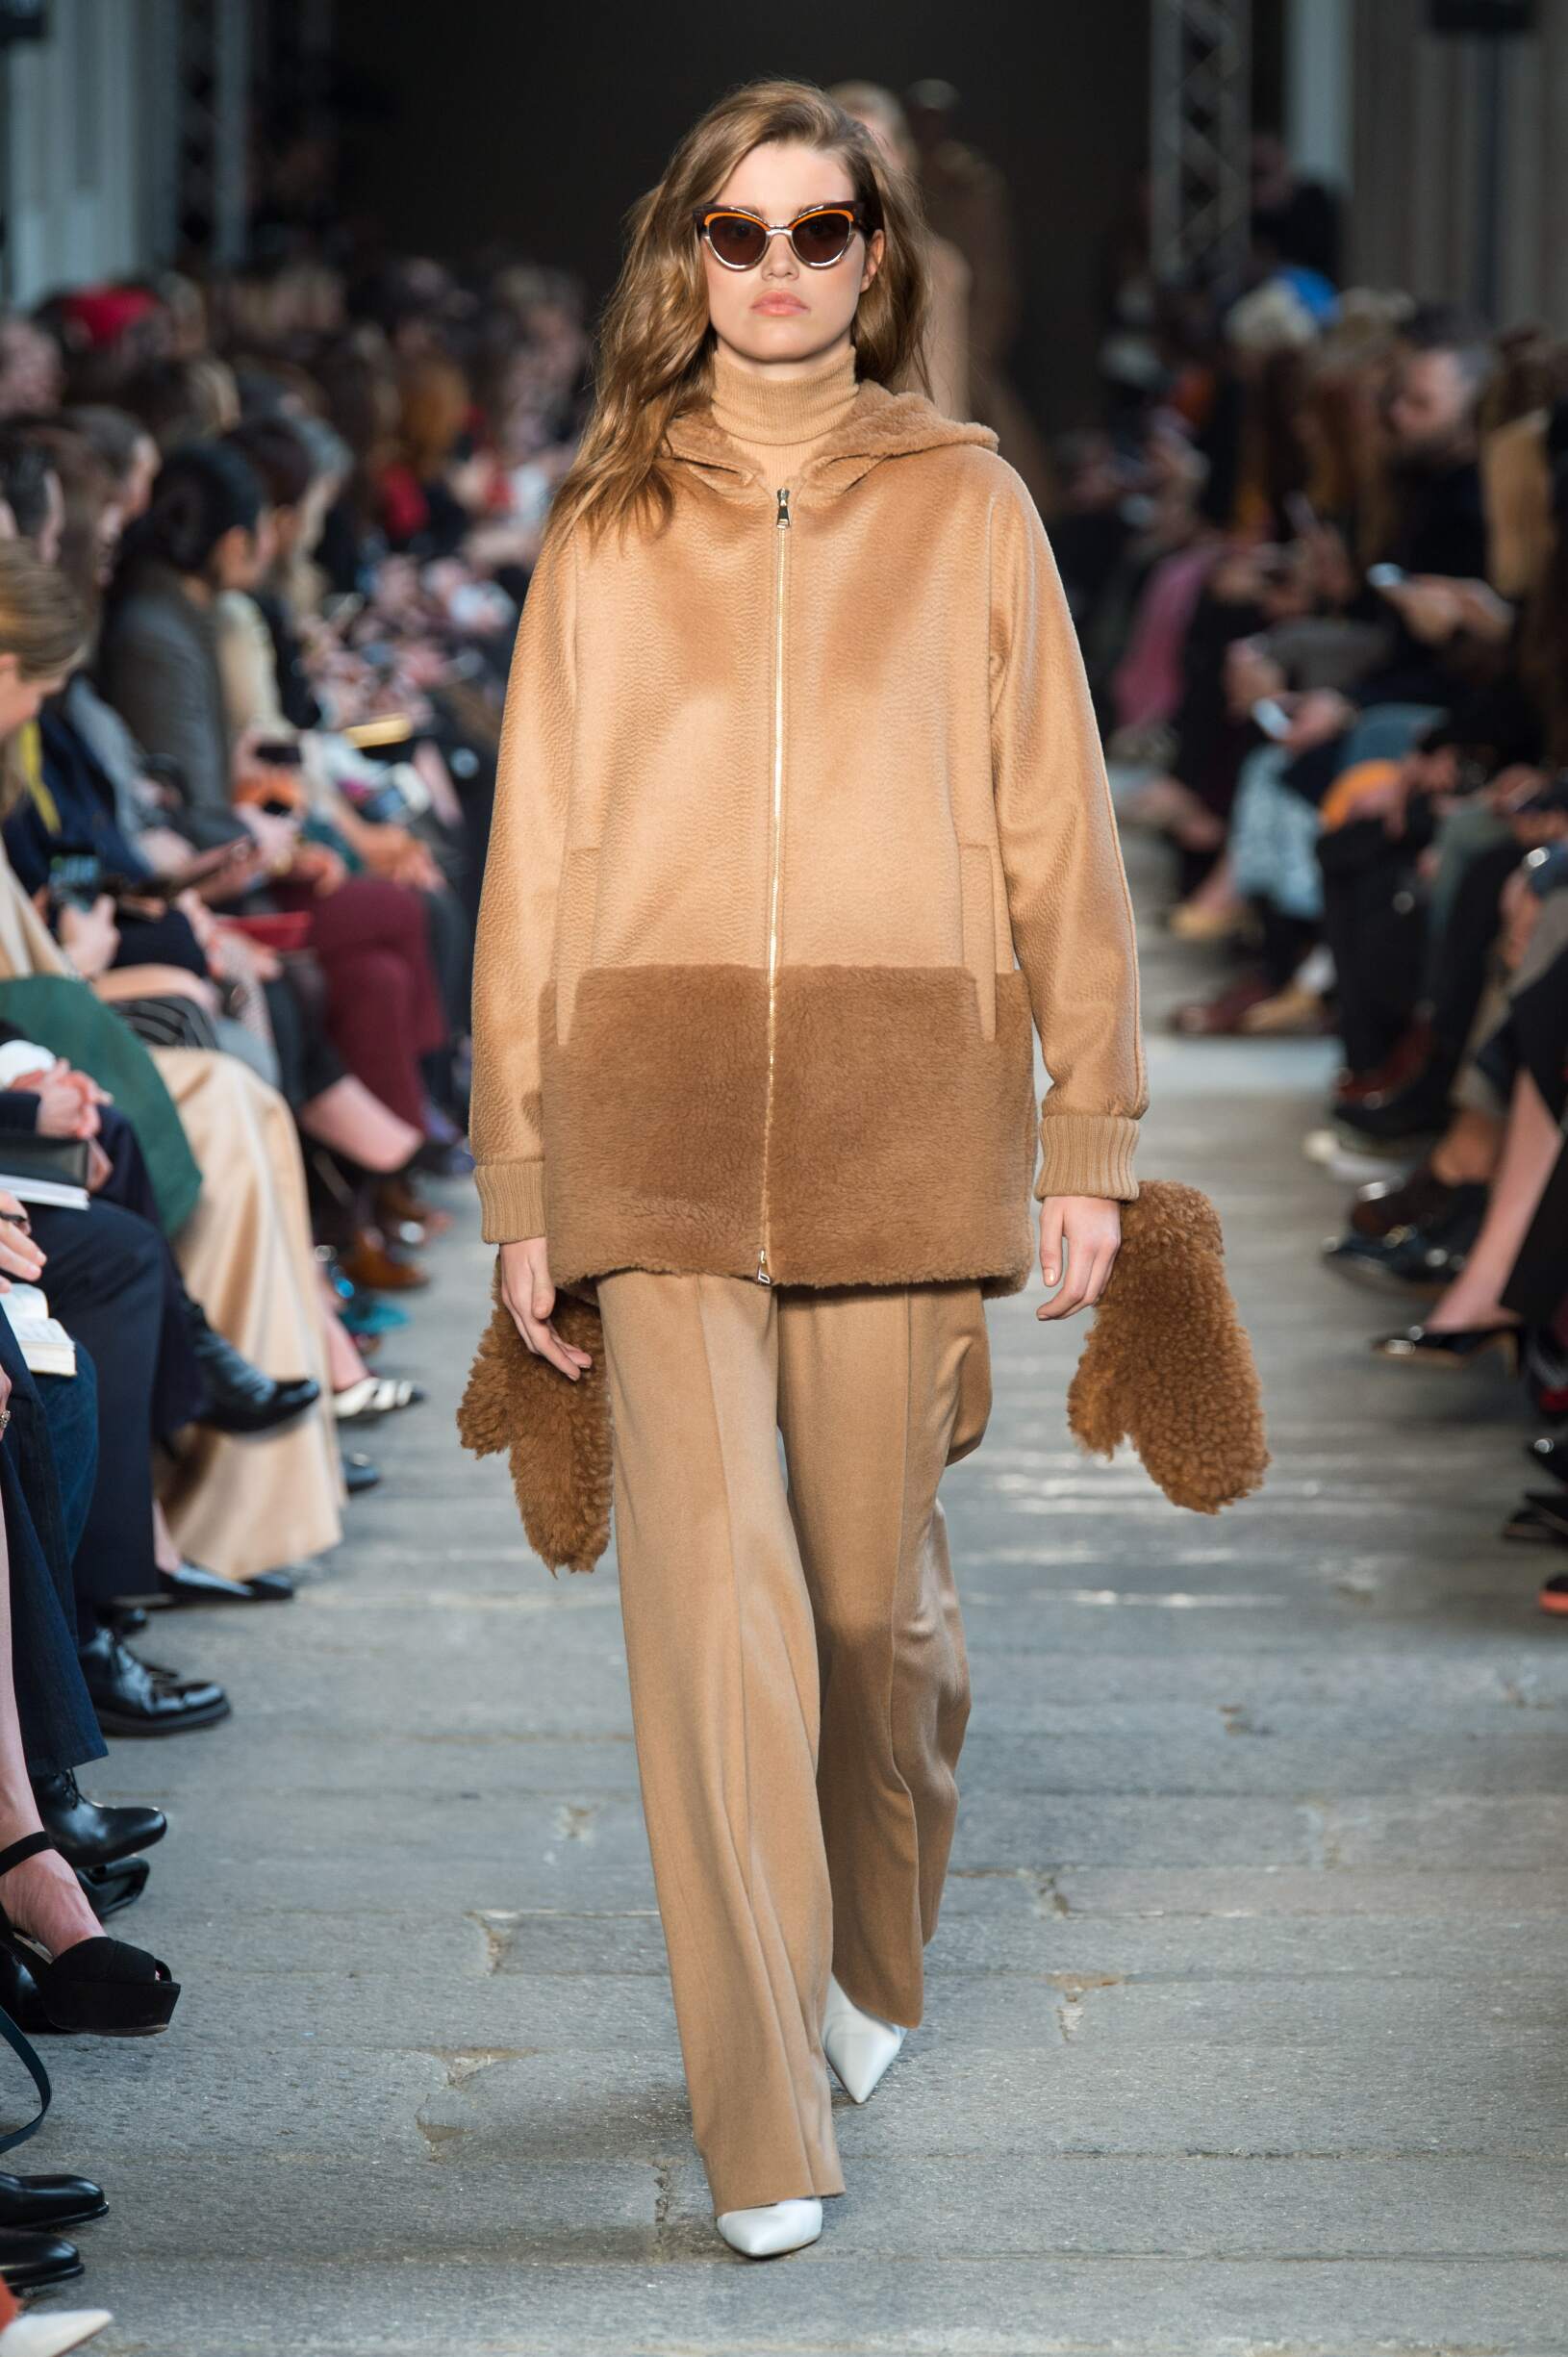 MAX MARA FALL WINTER 2017-18 WOMEN'S COLLECTION | The Skinny Beep